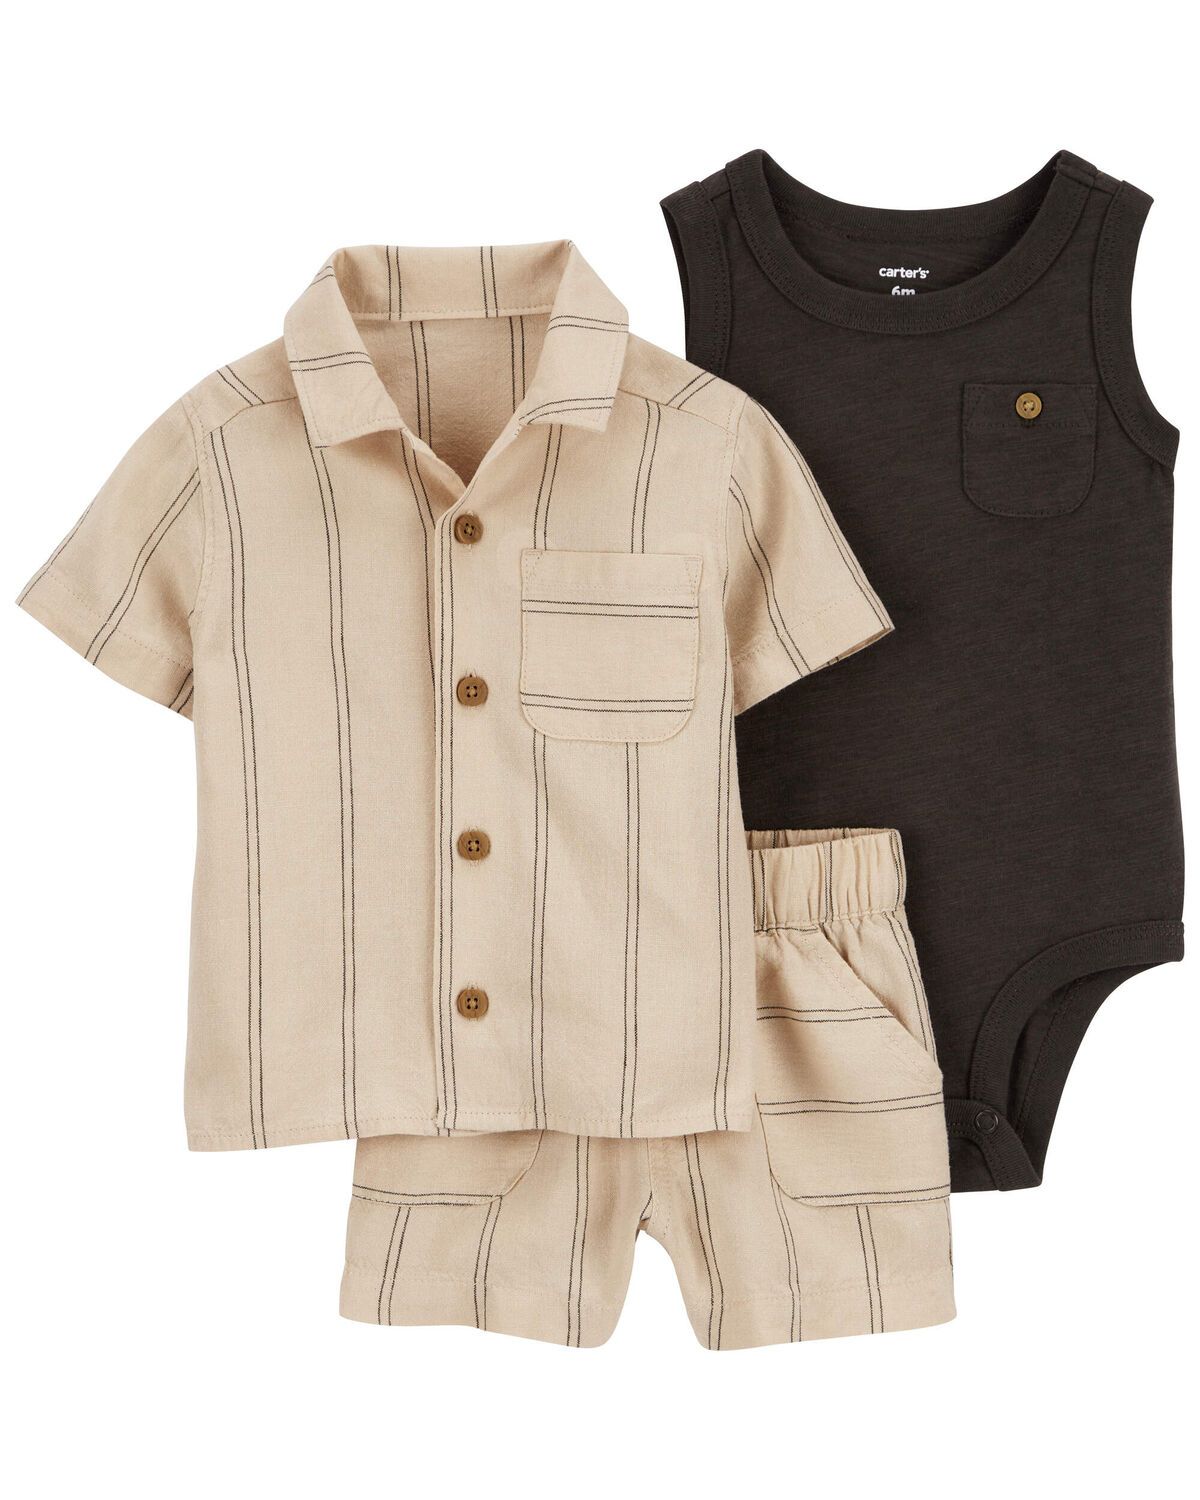 Baby 3-Piece LENZING™ ECOVERO™ Outfit Set | Carter's